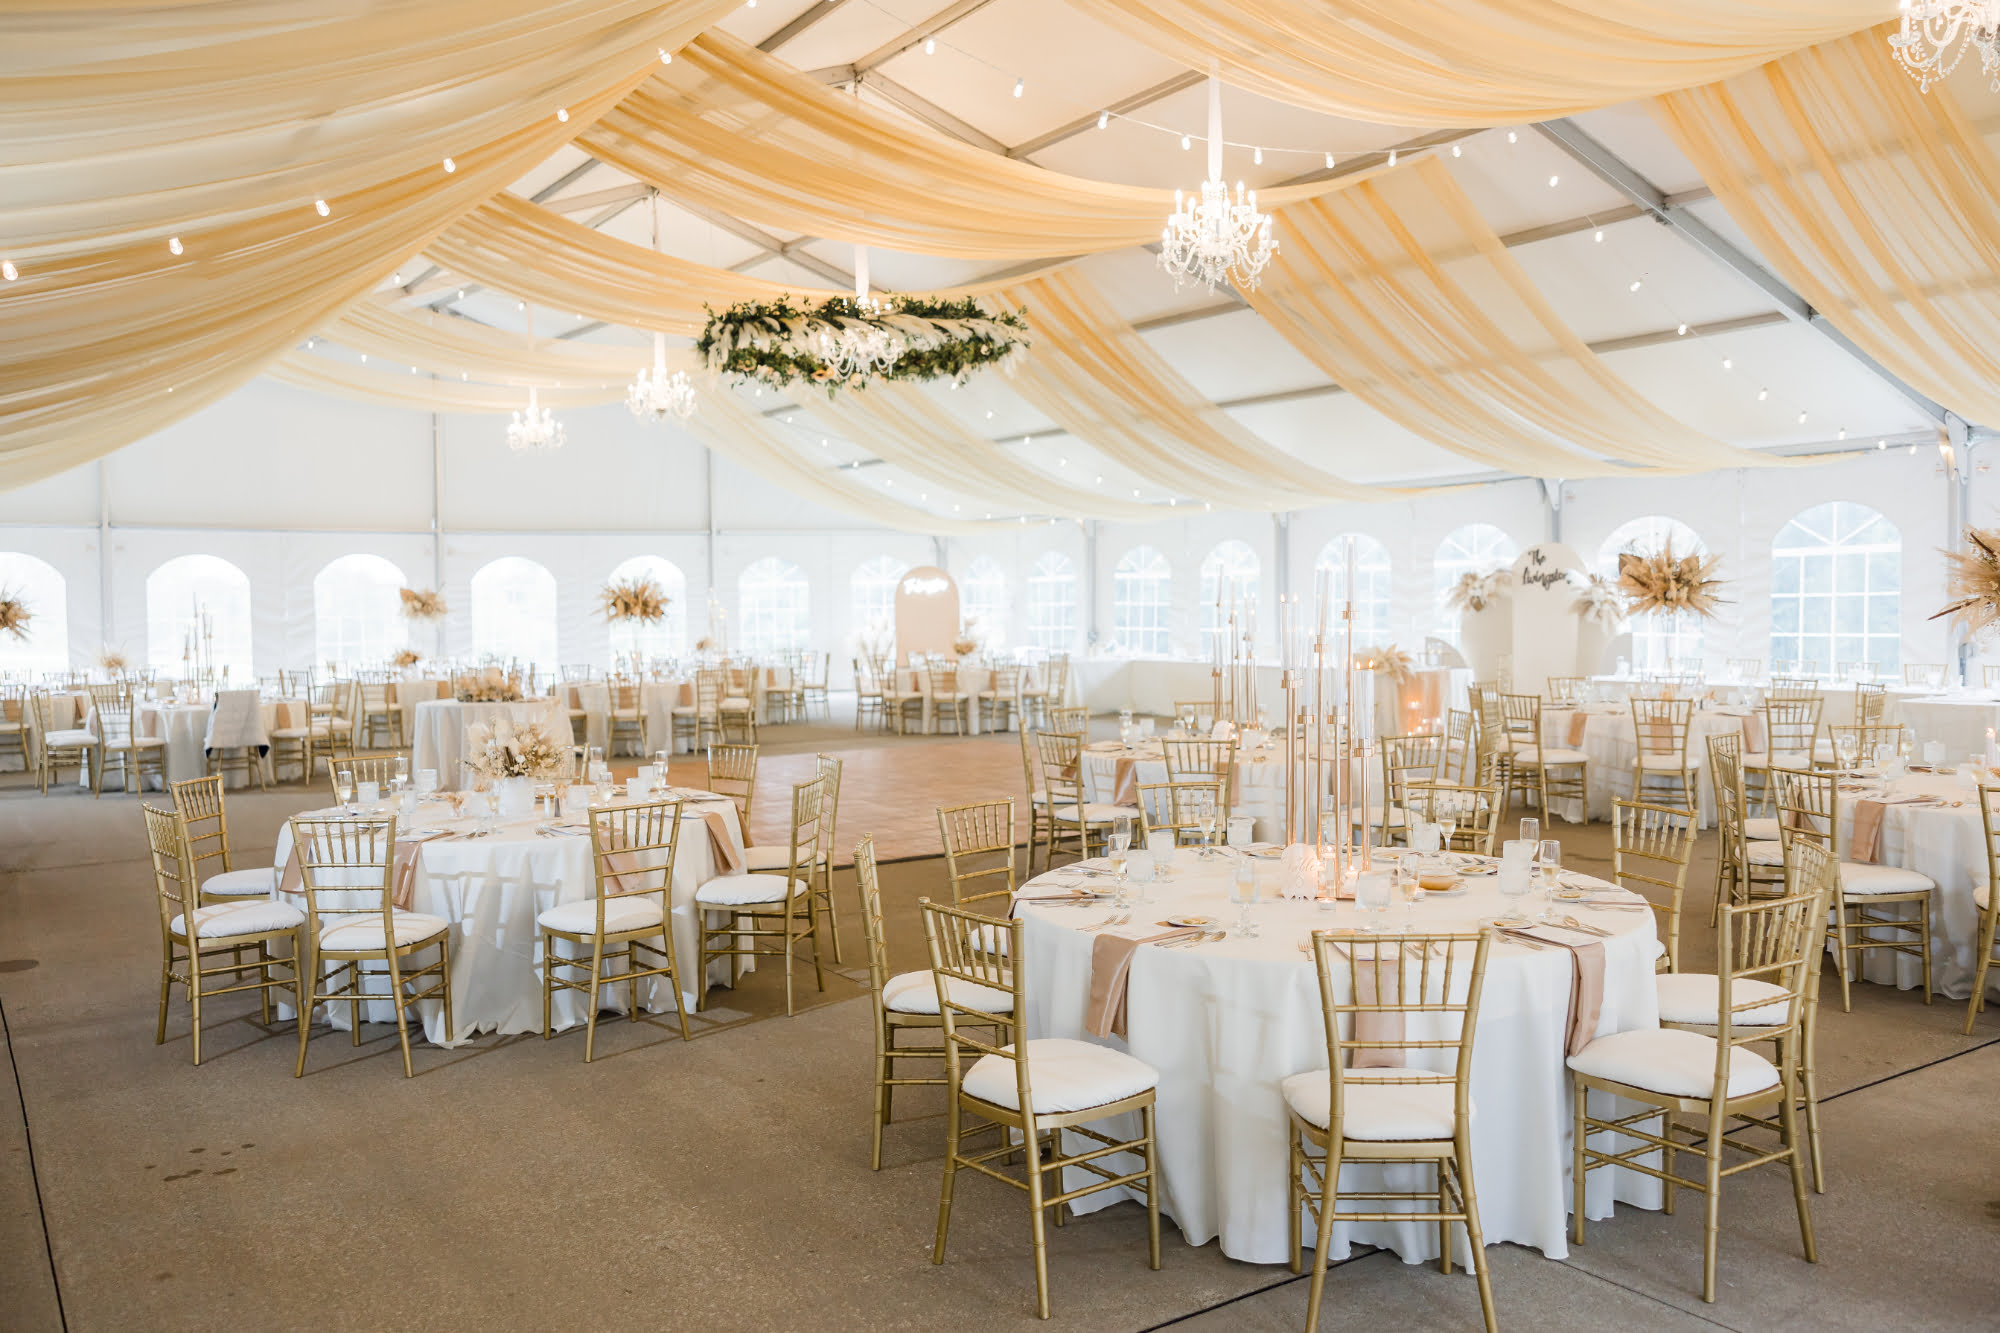 Hire ILLUME as your wedding decorator in Pittsburgh, PA